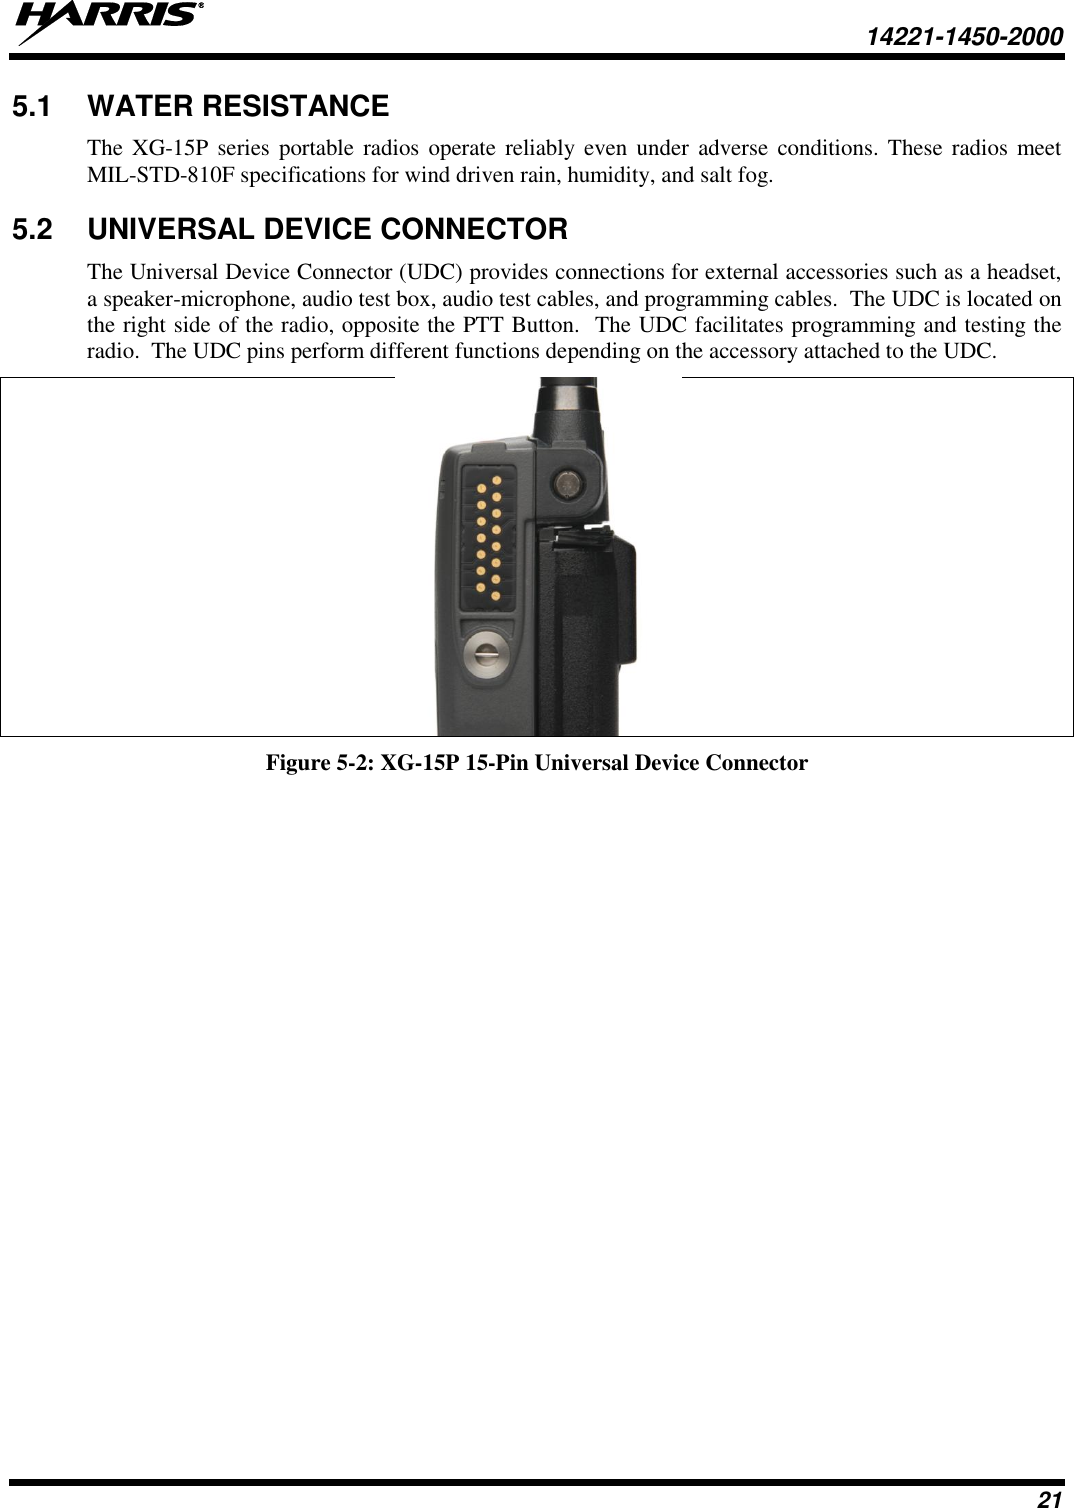   14221-1450-2000  21 5.1  WATER RESISTANCE The  XG-15P  series  portable  radios operate  reliably even  under  adverse  conditions. These radios  meet MIL-STD-810F specifications for wind driven rain, humidity, and salt fog.  5.2  UNIVERSAL DEVICE CONNECTOR The Universal Device Connector (UDC) provides connections for external accessories such as a headset, a speaker-microphone, audio test box, audio test cables, and programming cables.  The UDC is located on the right side of the radio, opposite the PTT Button.  The UDC facilitates programming and testing the radio.  The UDC pins perform different functions depending on the accessory attached to the UDC.    Figure 5-2: XG-15P 15-Pin Universal Device Connector 